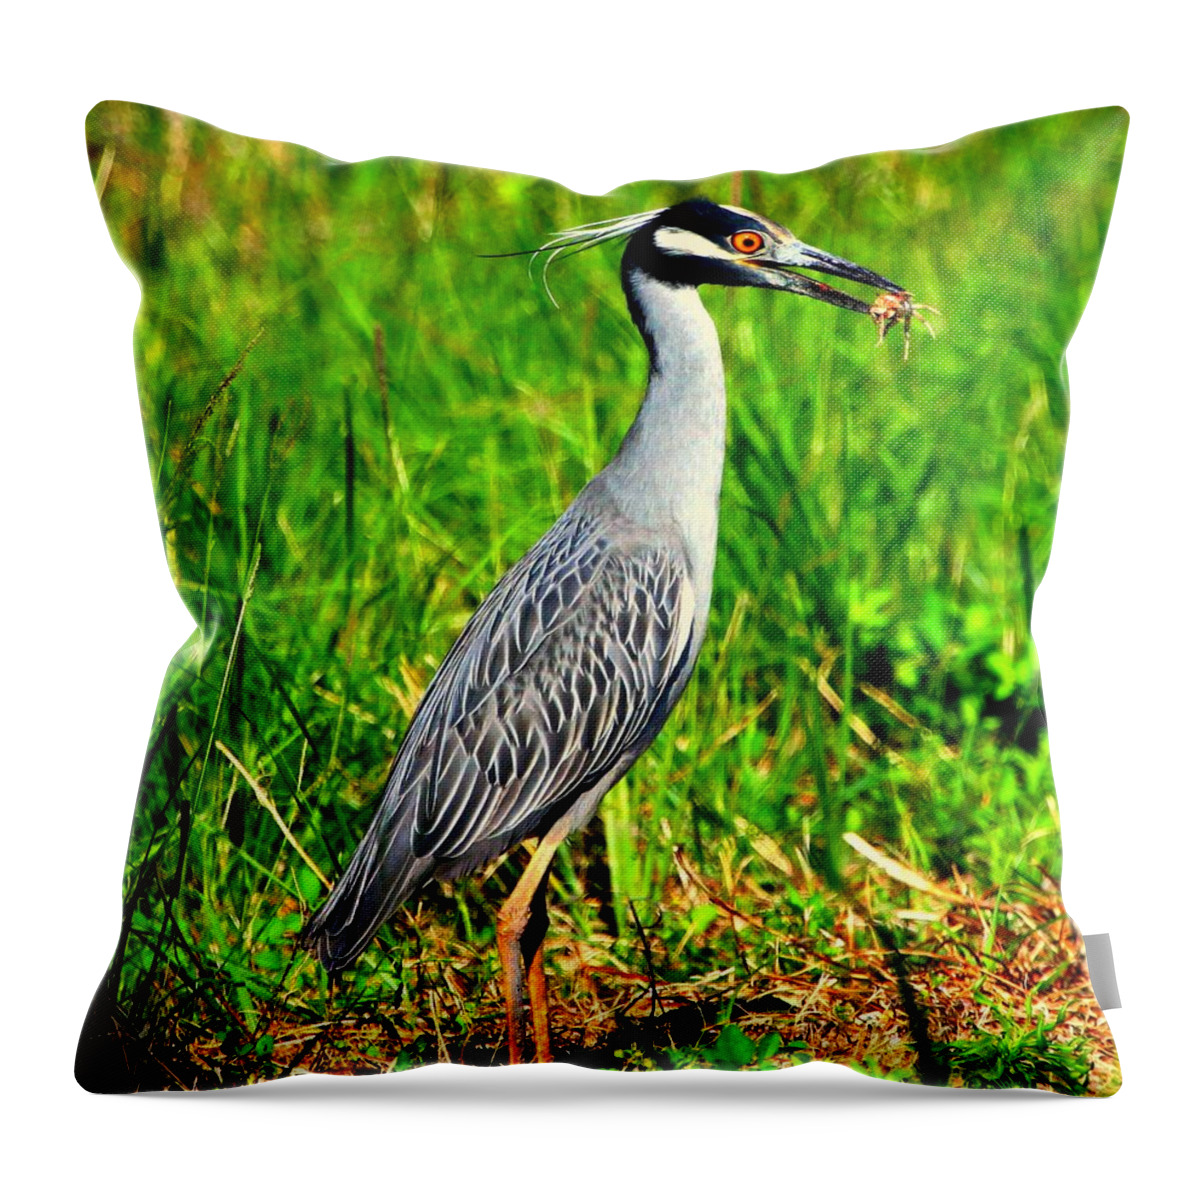 Yellow-crested Night Heron Throw Pillow featuring the photograph Yellow Crested Night Heron Catches a Fiddler Crab by Barbara Bowen